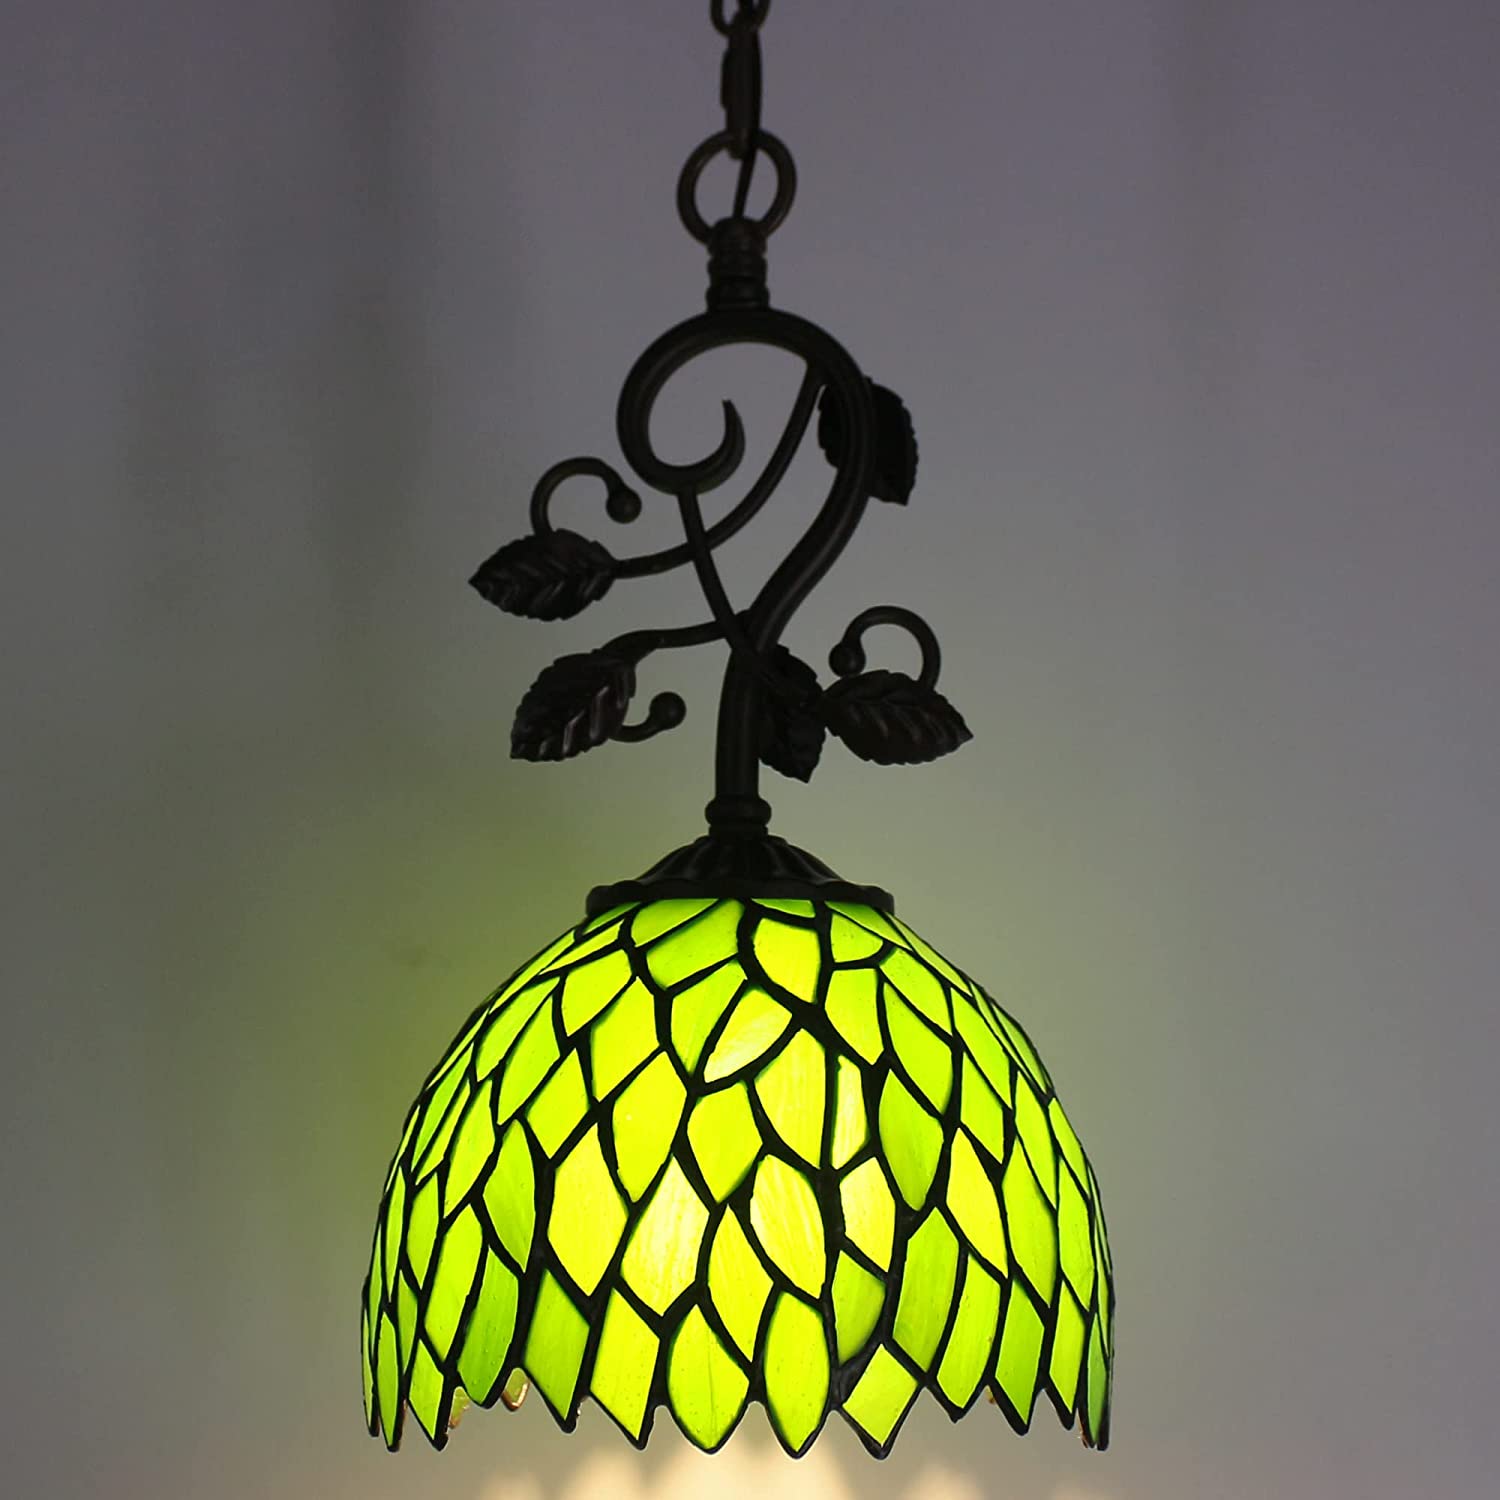 Werfactory® Tiffany Pendant Lighting with 8" Green Stained Glass Leaf Style Hanging Lamp